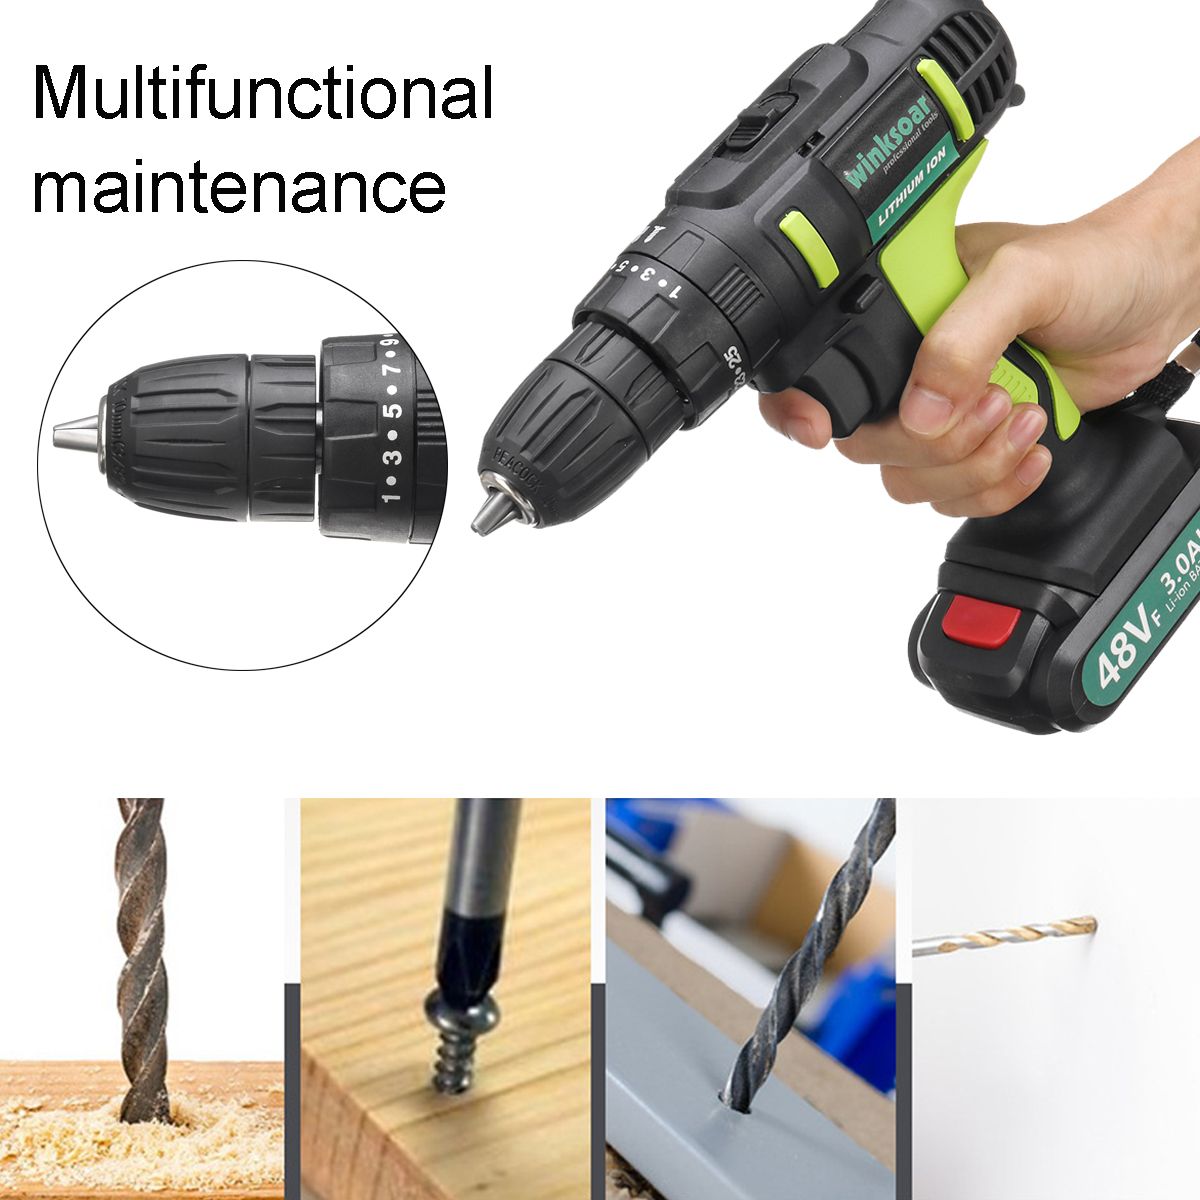 48VF-3-in-1-251-Gears-Electric-Impact-Drill-2-Speeds-Rechargeable-Screwdriver-W-LED-Light-1733392